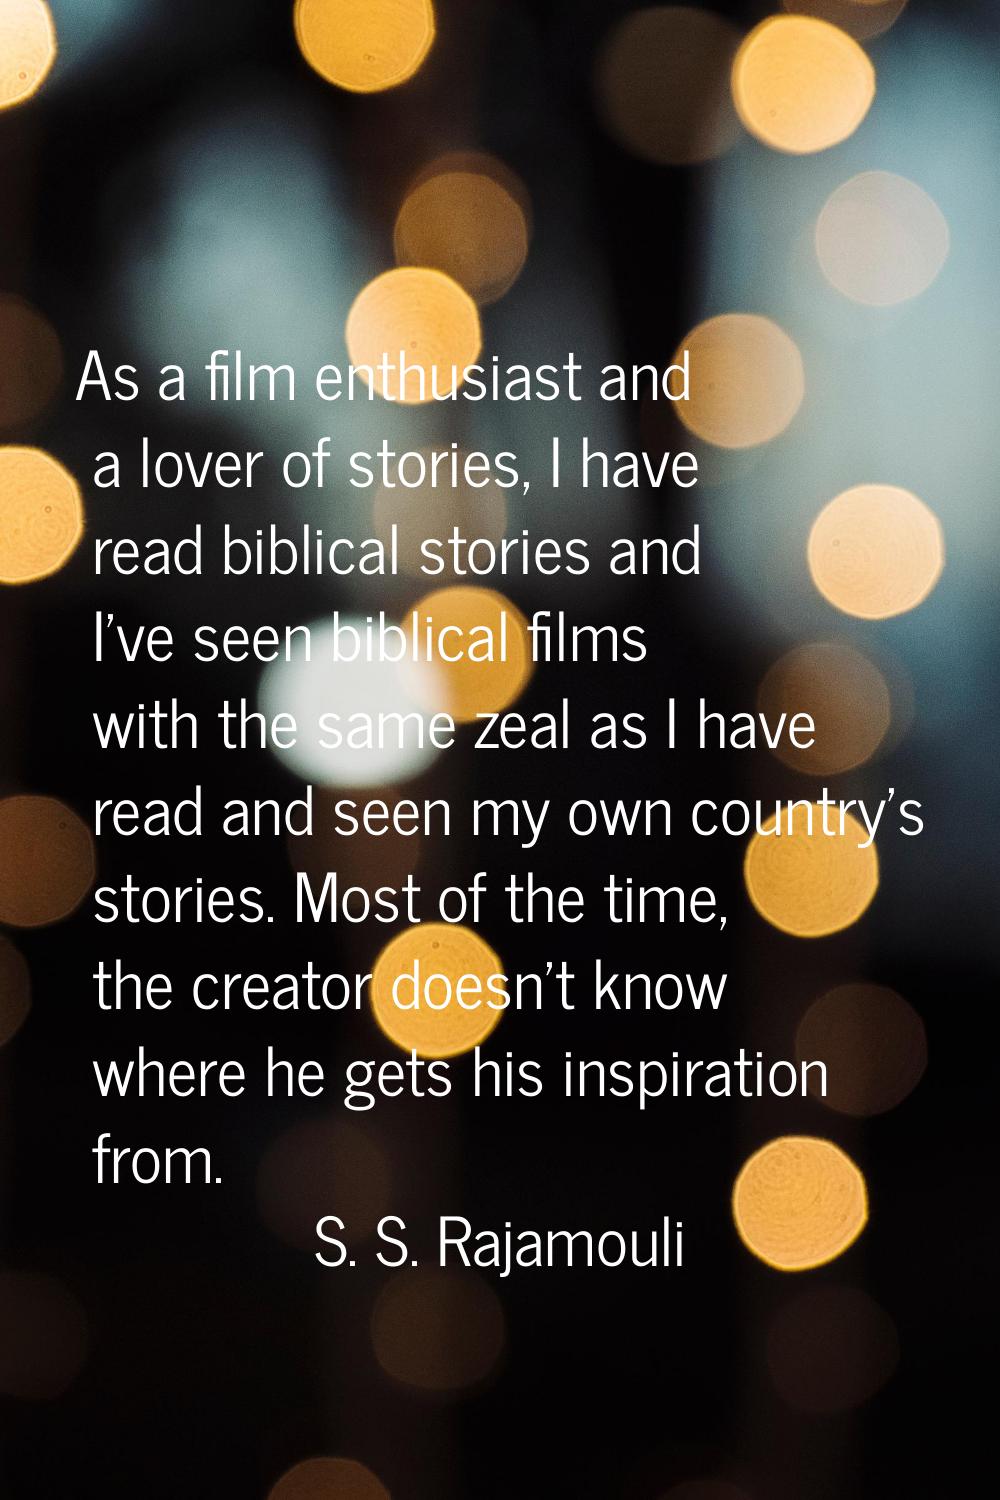 As a film enthusiast and a lover of stories, I have read biblical stories and I've seen biblical fi